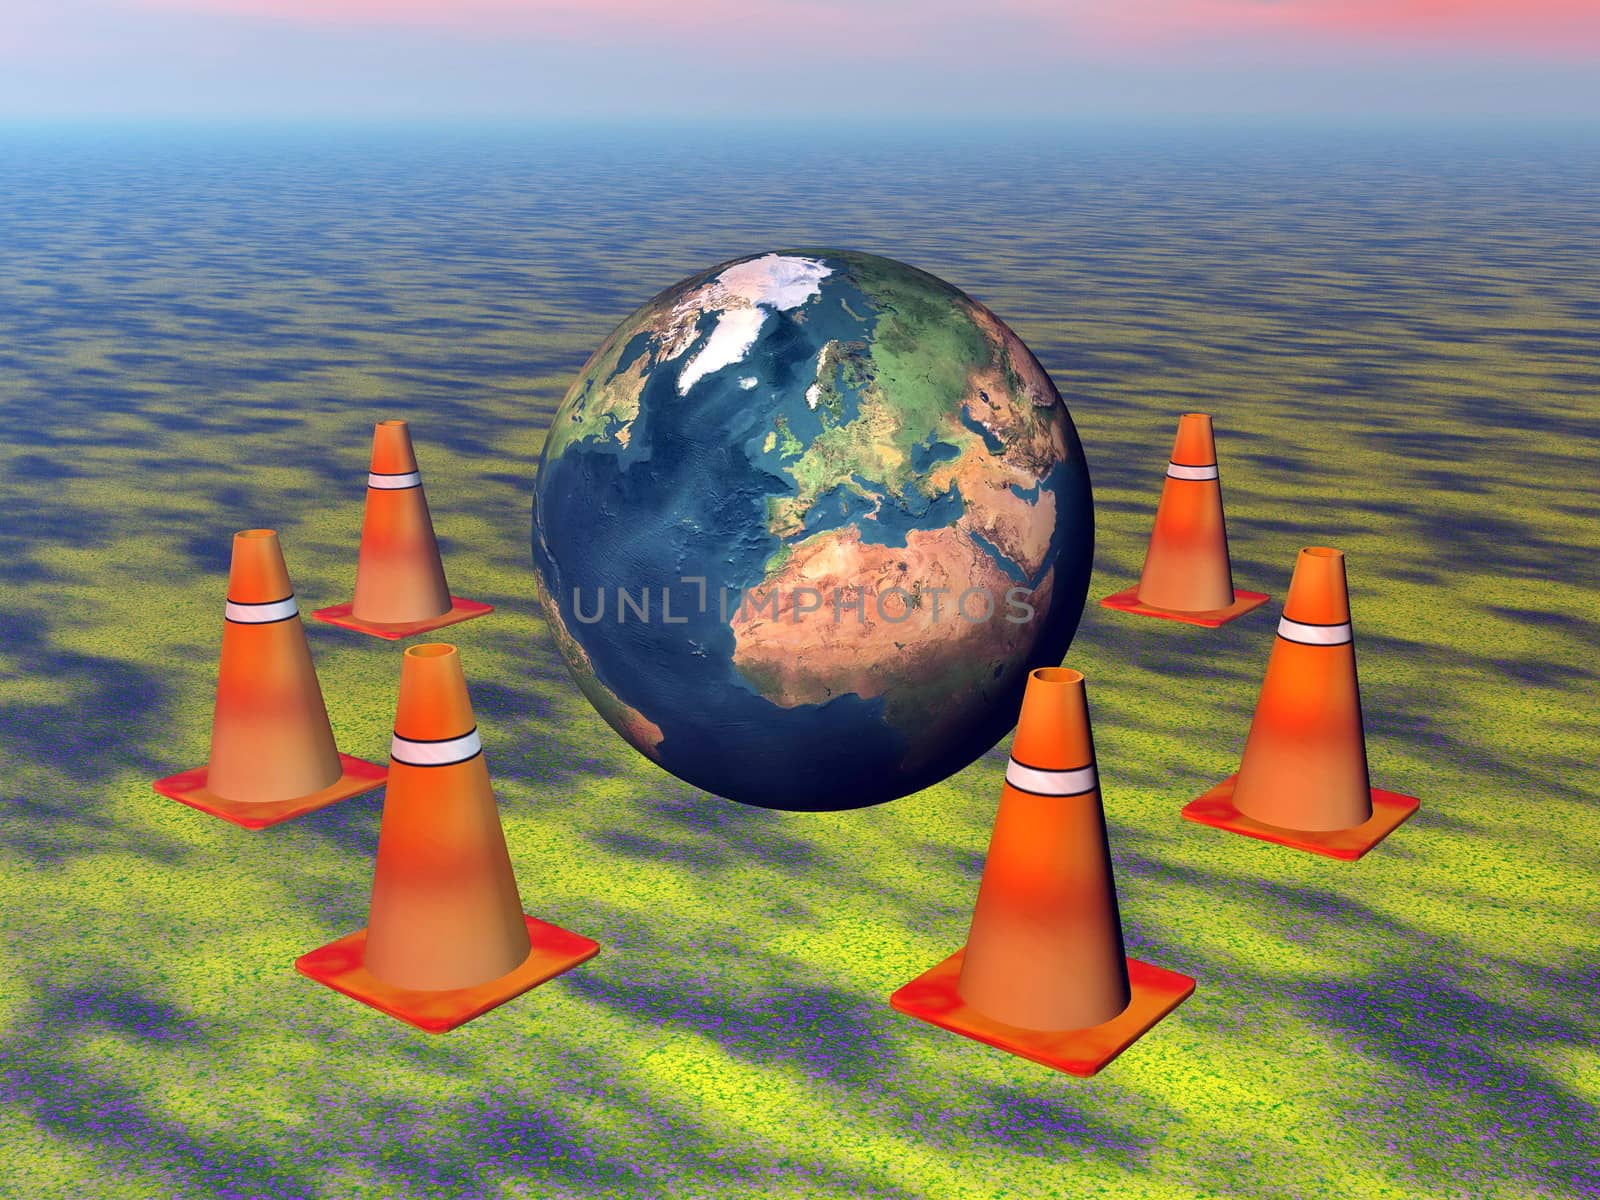 Globe surrounded with orange traffic cones on green grass